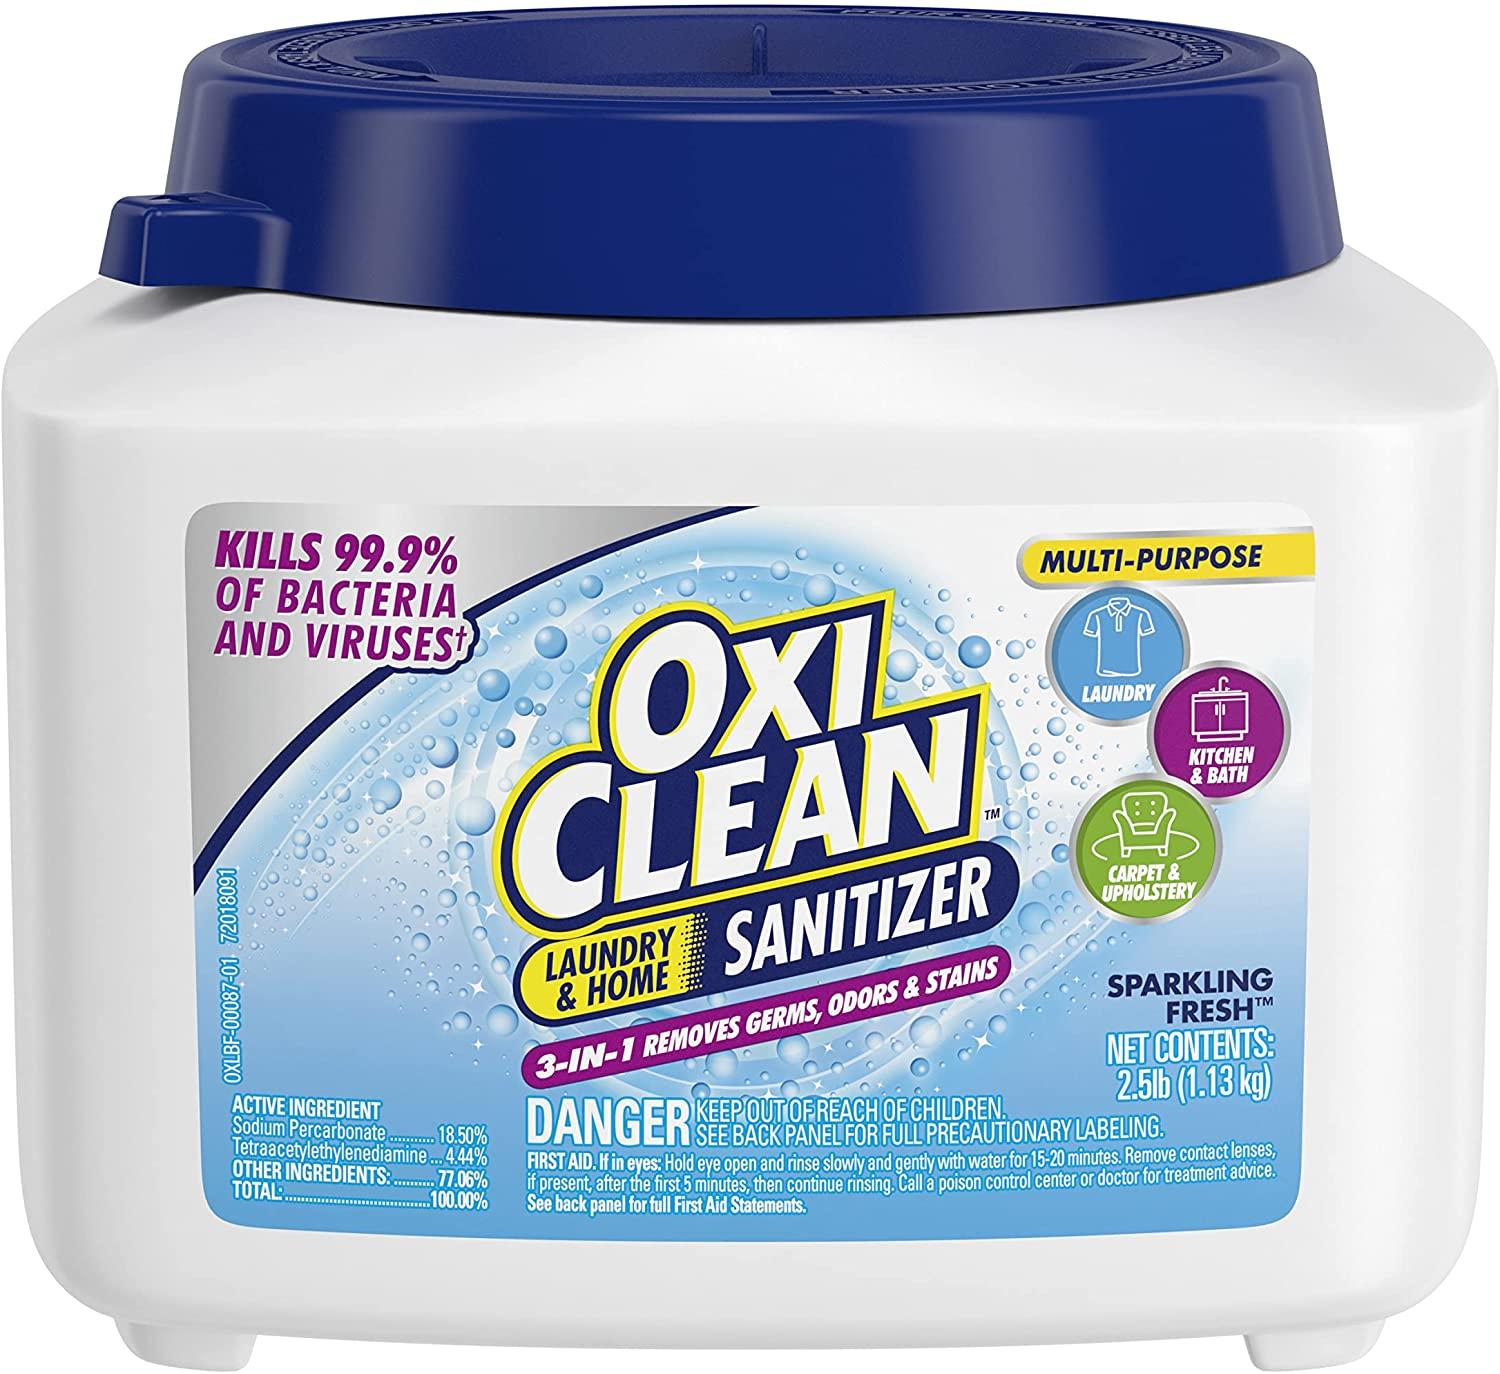 2.5Lb OxiClean Powder 3-in-1 Home & Laundry Sanitizer for $5.59 Shipped